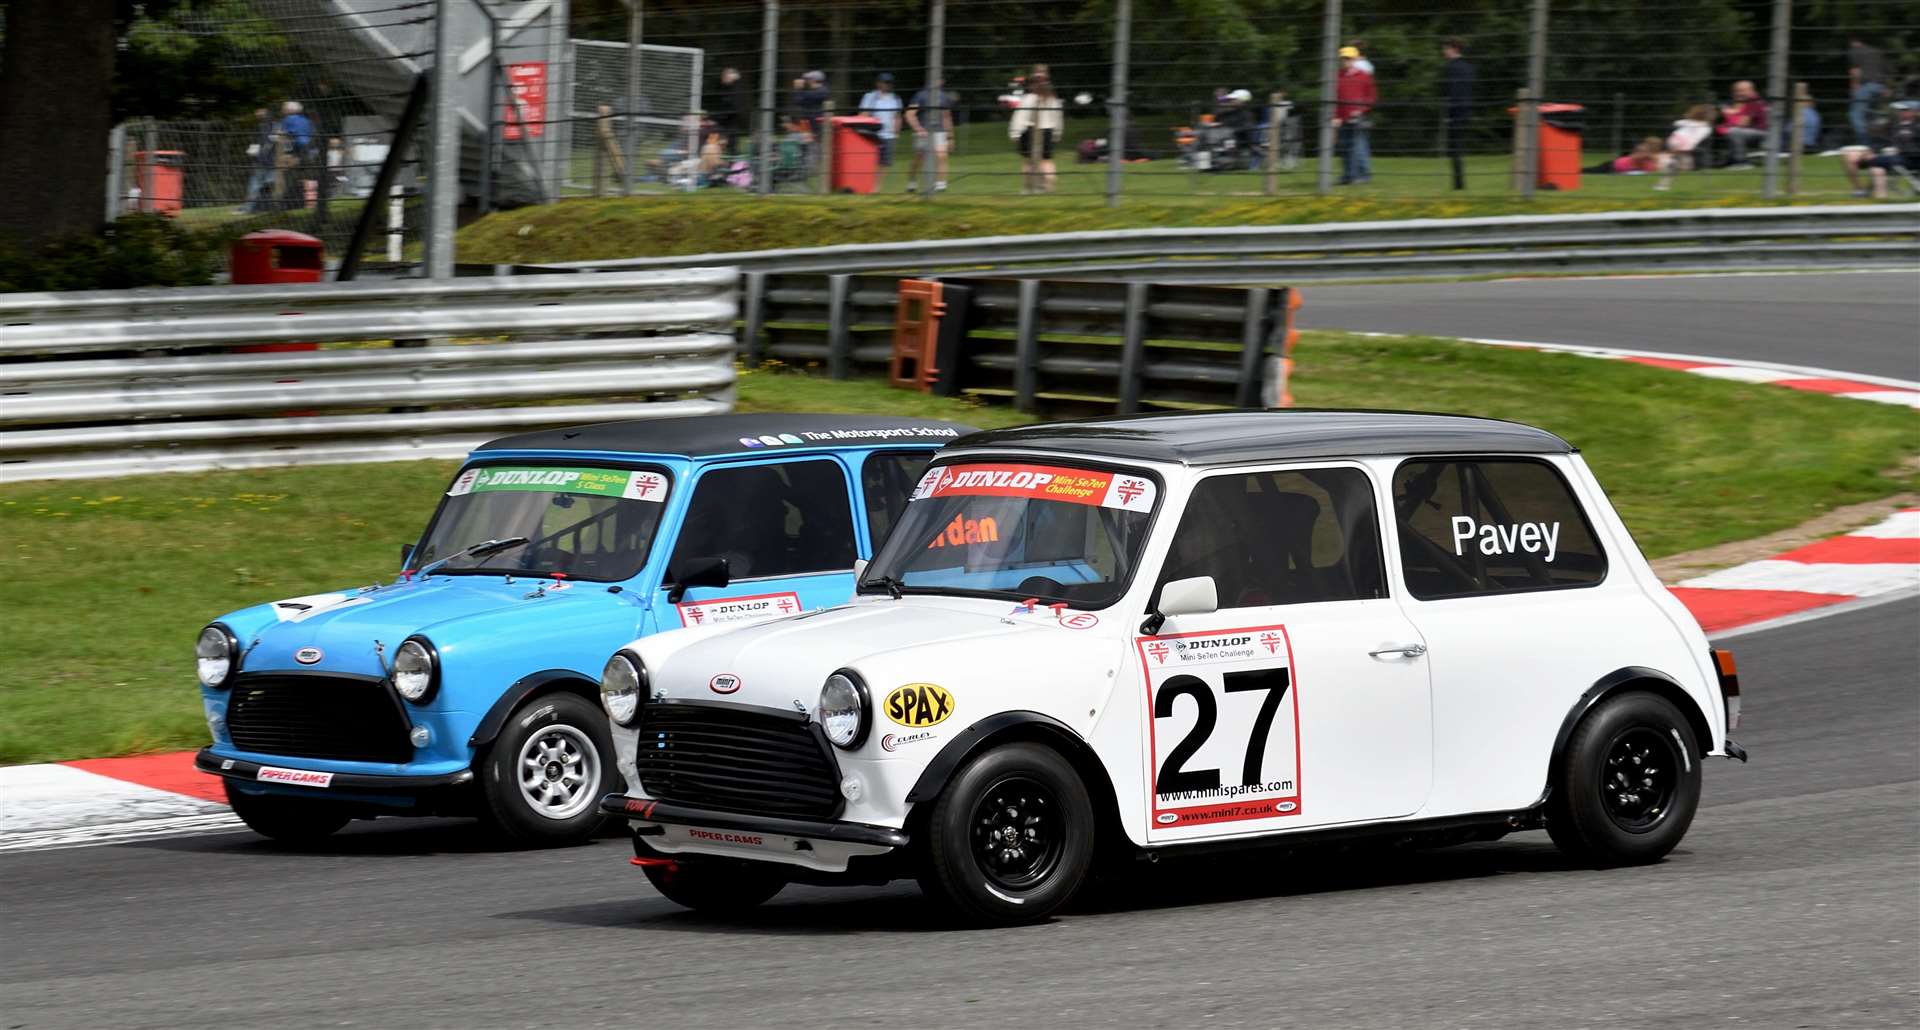 Robert Pavey, from Maidstone, finished ninth in the first Mini Seven race, but failed to finish race two. Picture: Simon Hildrew